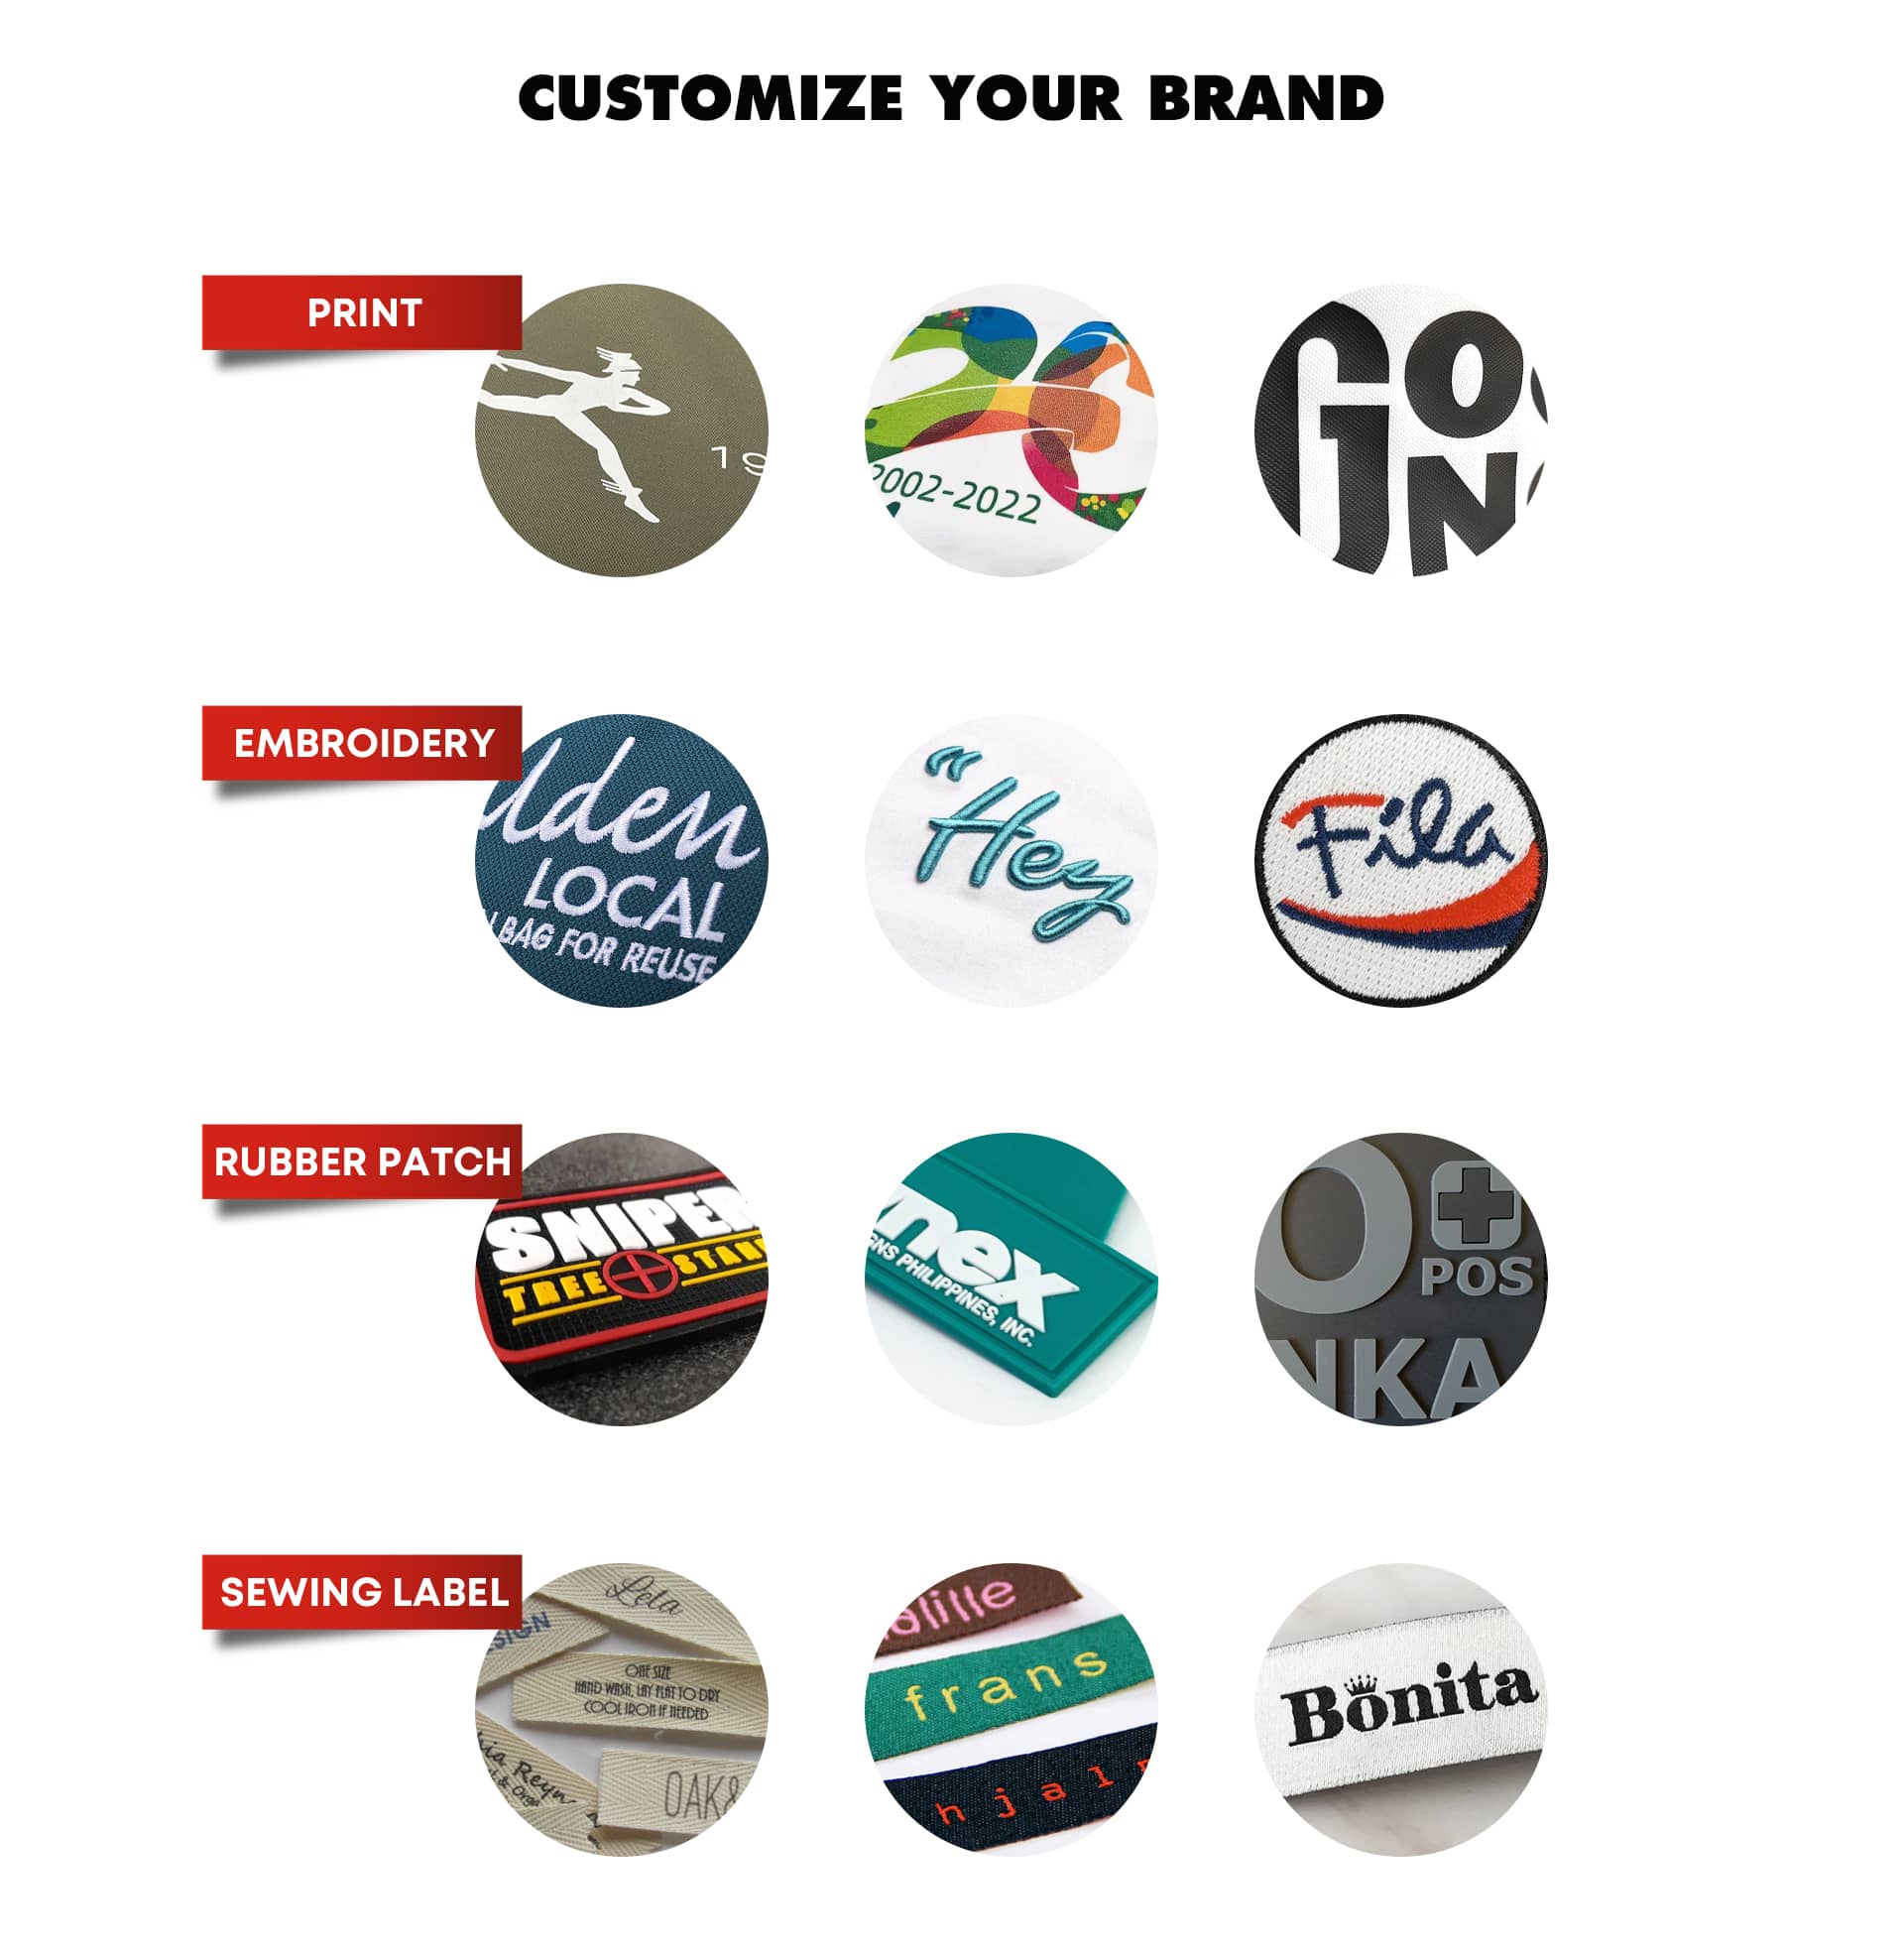 Customize your brand